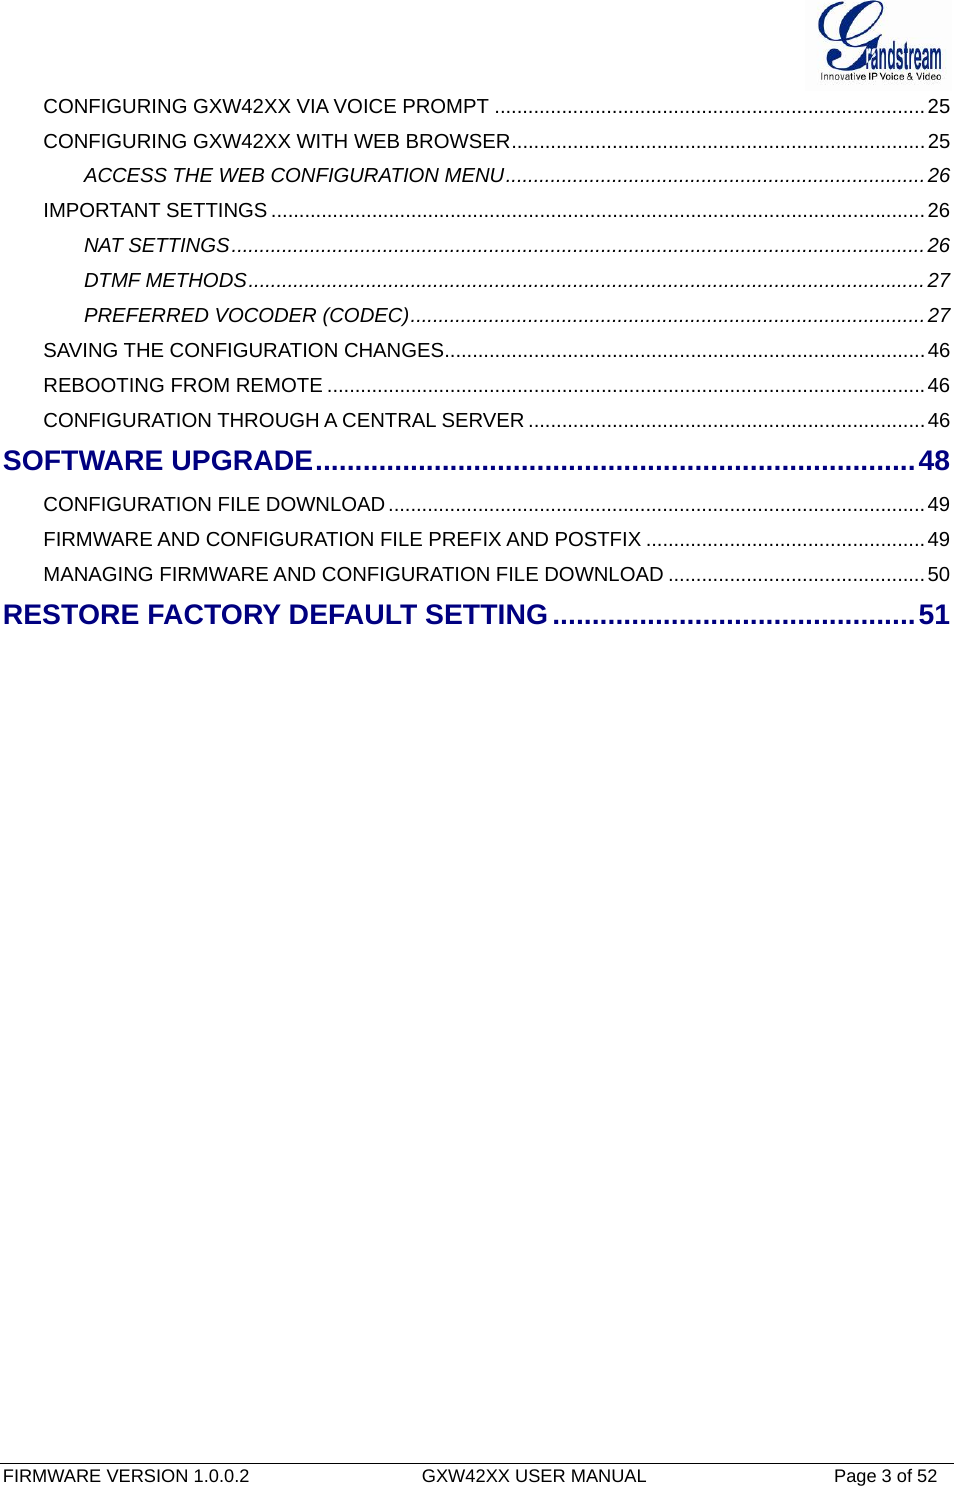  FIRMWARE VERSION 1.0.0.2                                  GXW42XX USER MANUAL                                     Page 3 of 52   CONFIGURING GXW42XX VIA VOICE PROMPT .............................................................................25CONFIGURING GXW42XX WITH WEB BROWSER..........................................................................25ACCESS THE WEB CONFIGURATION MENU...........................................................................26IMPORTANT SETTINGS .....................................................................................................................26NAT SETTINGS............................................................................................................................26DTMF METHODS.........................................................................................................................27PREFERRED VOCODER (CODEC)............................................................................................27SAVING THE CONFIGURATION CHANGES......................................................................................46REBOOTING FROM REMOTE ...........................................................................................................46CONFIGURATION THROUGH A CENTRAL SERVER .......................................................................46SOFTWARE UPGRADE............................................................................48CONFIGURATION FILE DOWNLOAD................................................................................................49FIRMWARE AND CONFIGURATION FILE PREFIX AND POSTFIX ..................................................49MANAGING FIRMWARE AND CONFIGURATION FILE DOWNLOAD ..............................................50RESTORE FACTORY DEFAULT SETTING..............................................51 